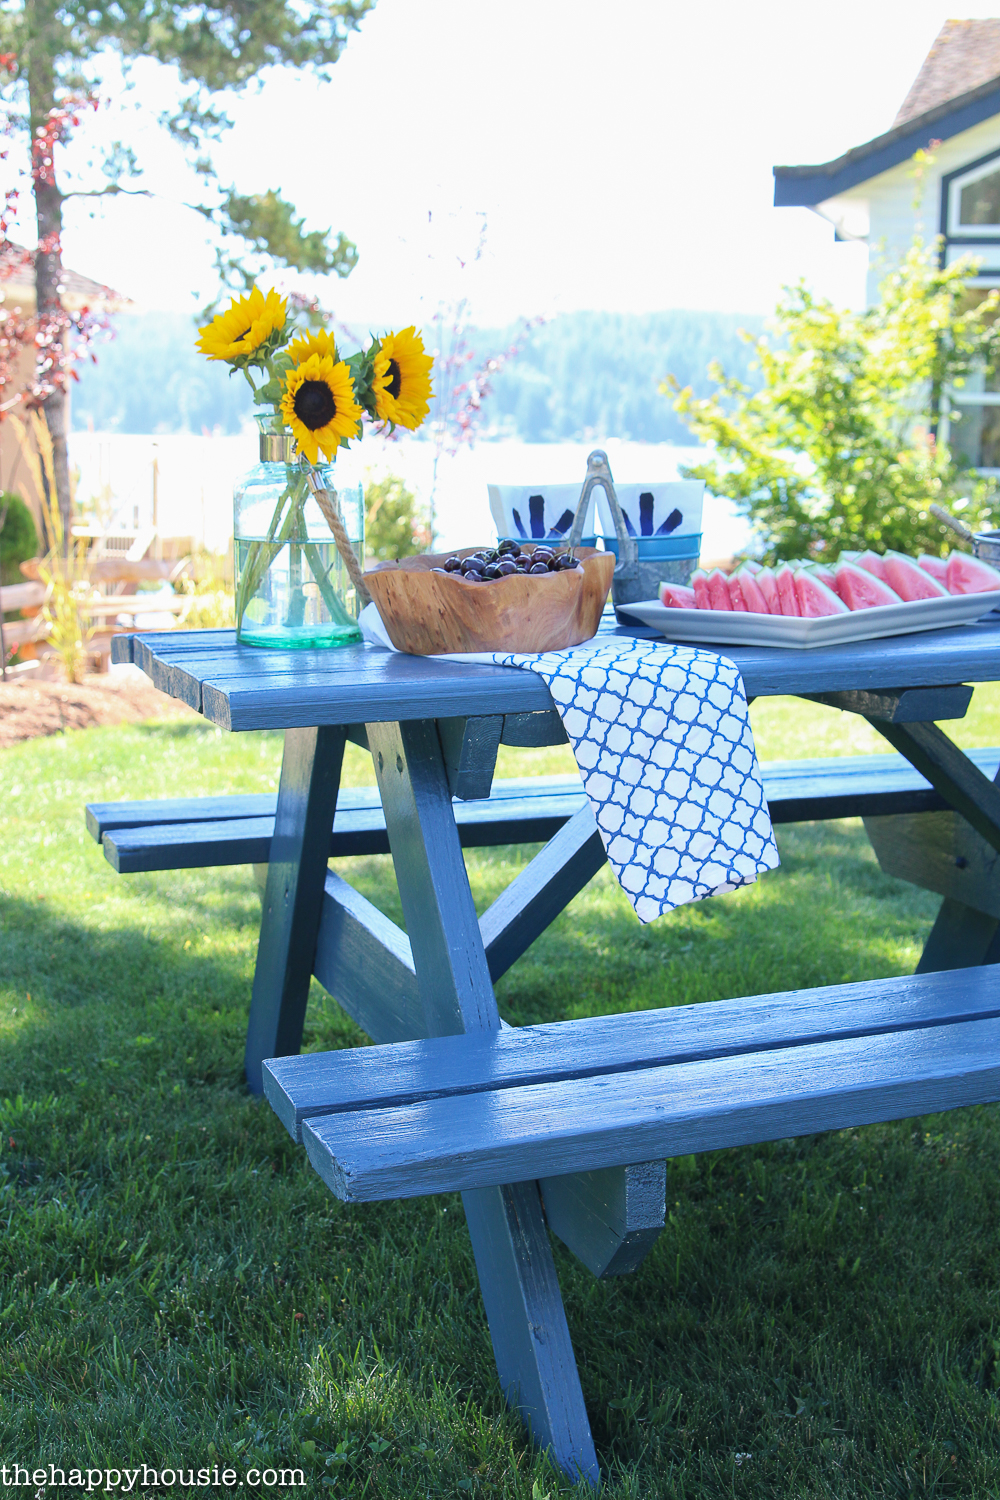 A picnic table with watermelon slices and a sunflower on it.